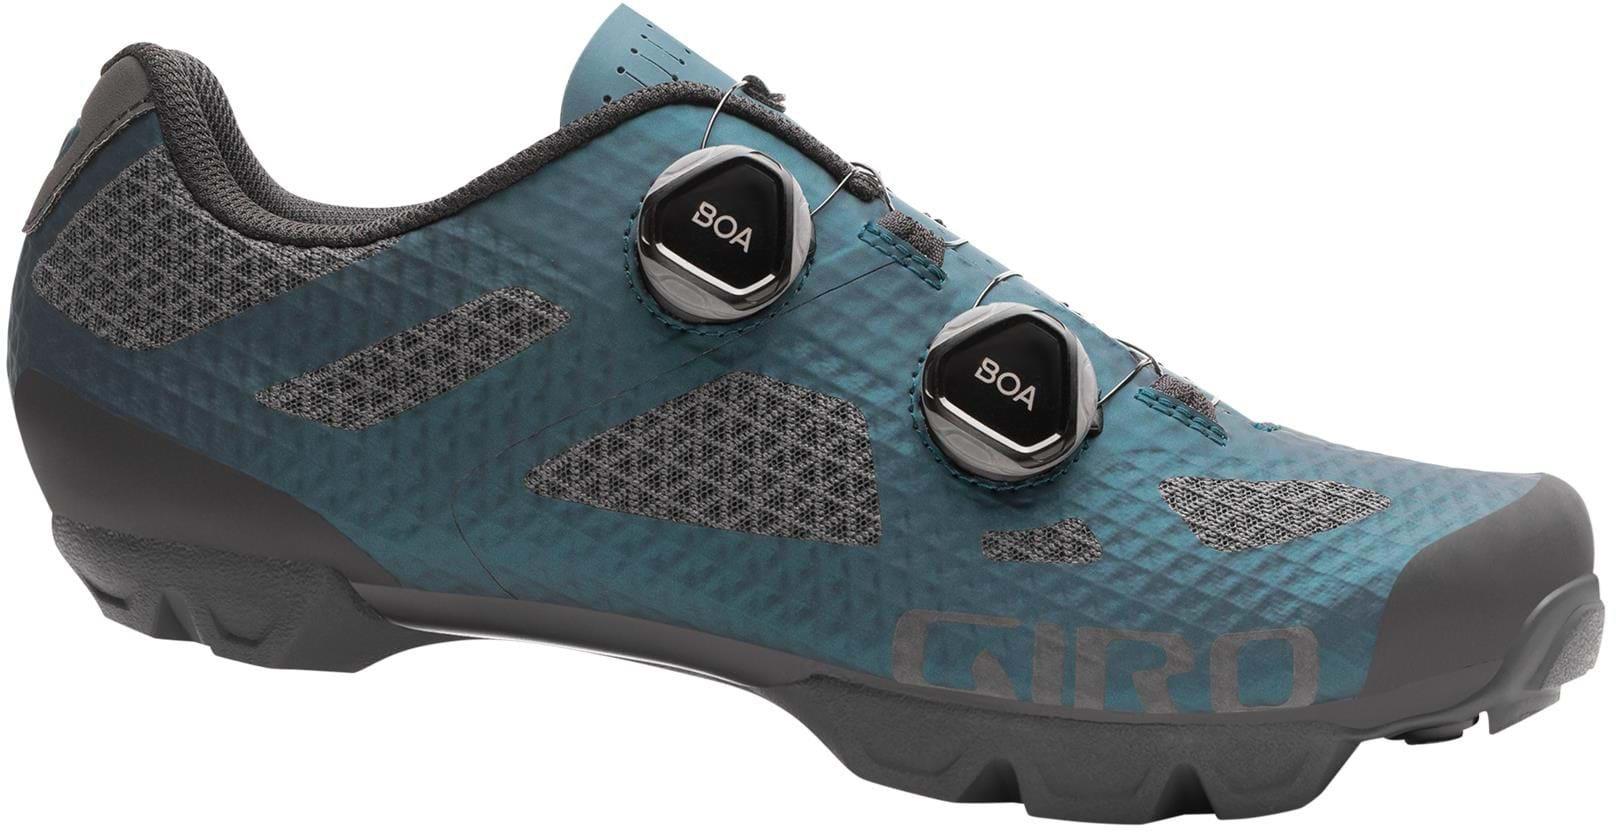 Giro Sector Mtb Cycling Shoes - Harbour Blue Ano